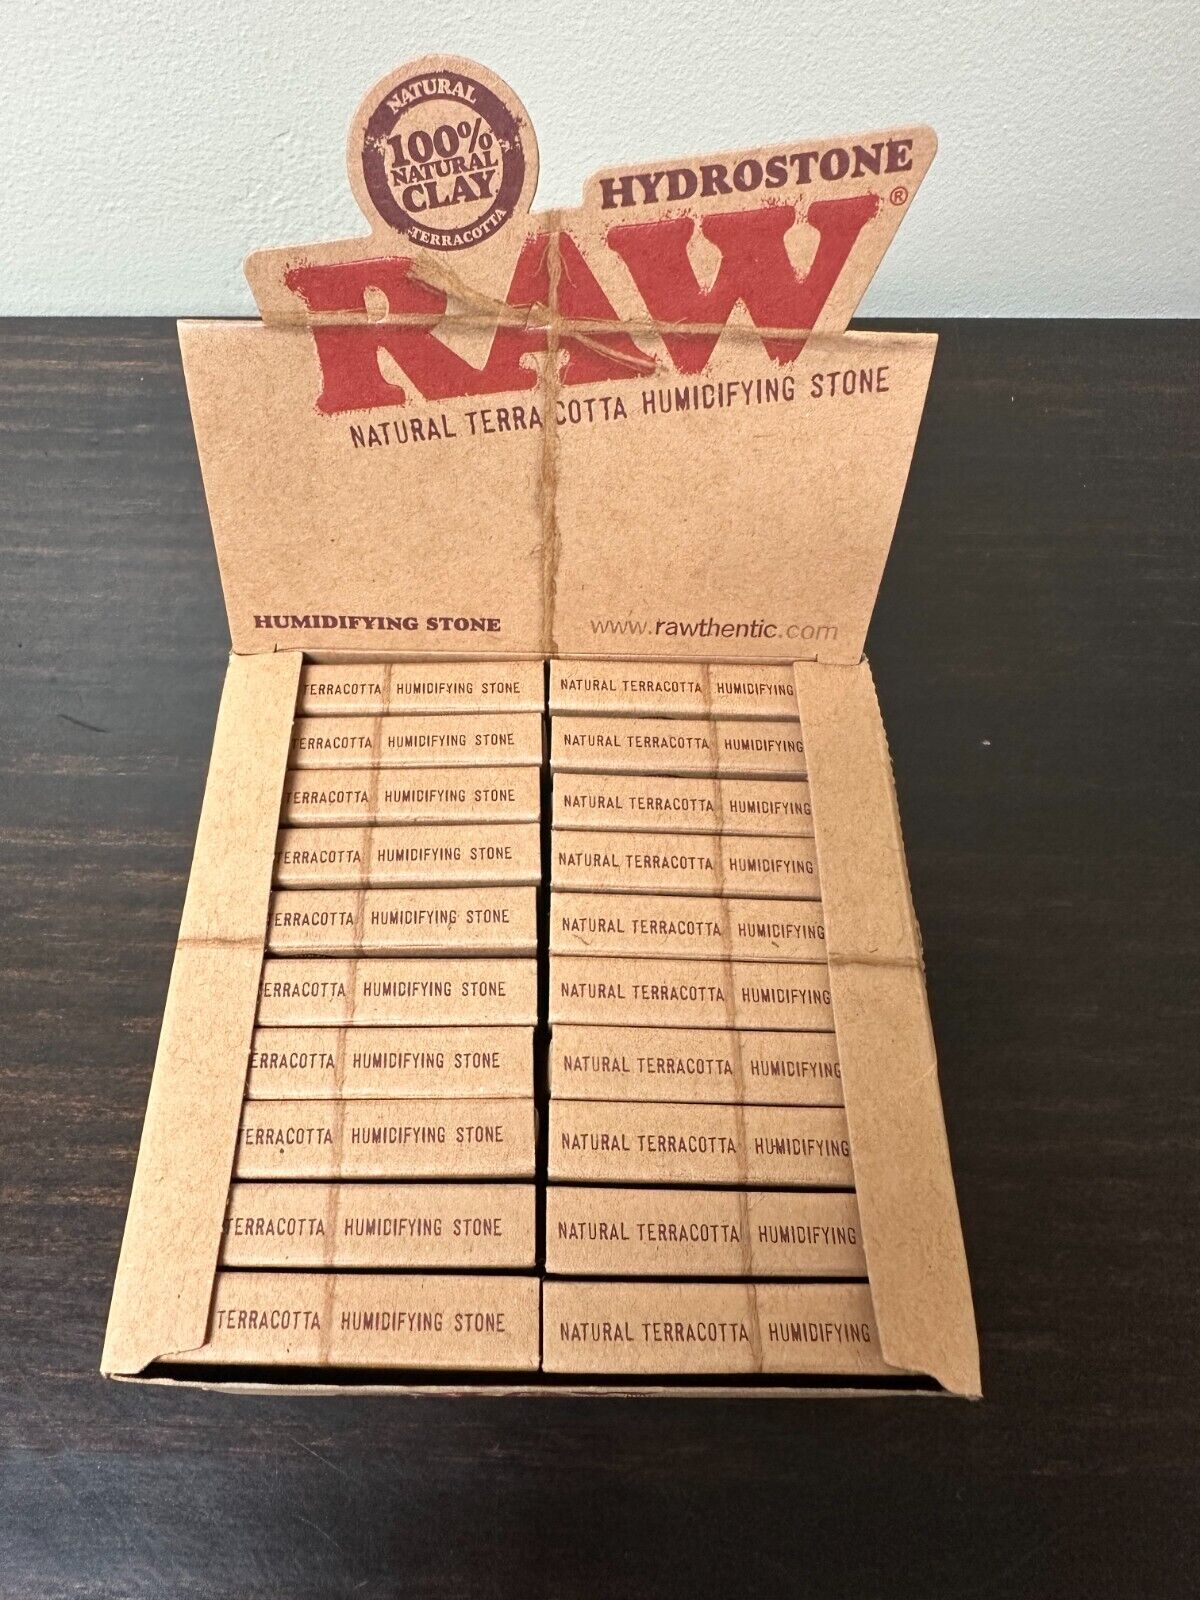 RAW Hydrostone - 20 Pack with Display -100% Natural Terracotta Humidifying Stone